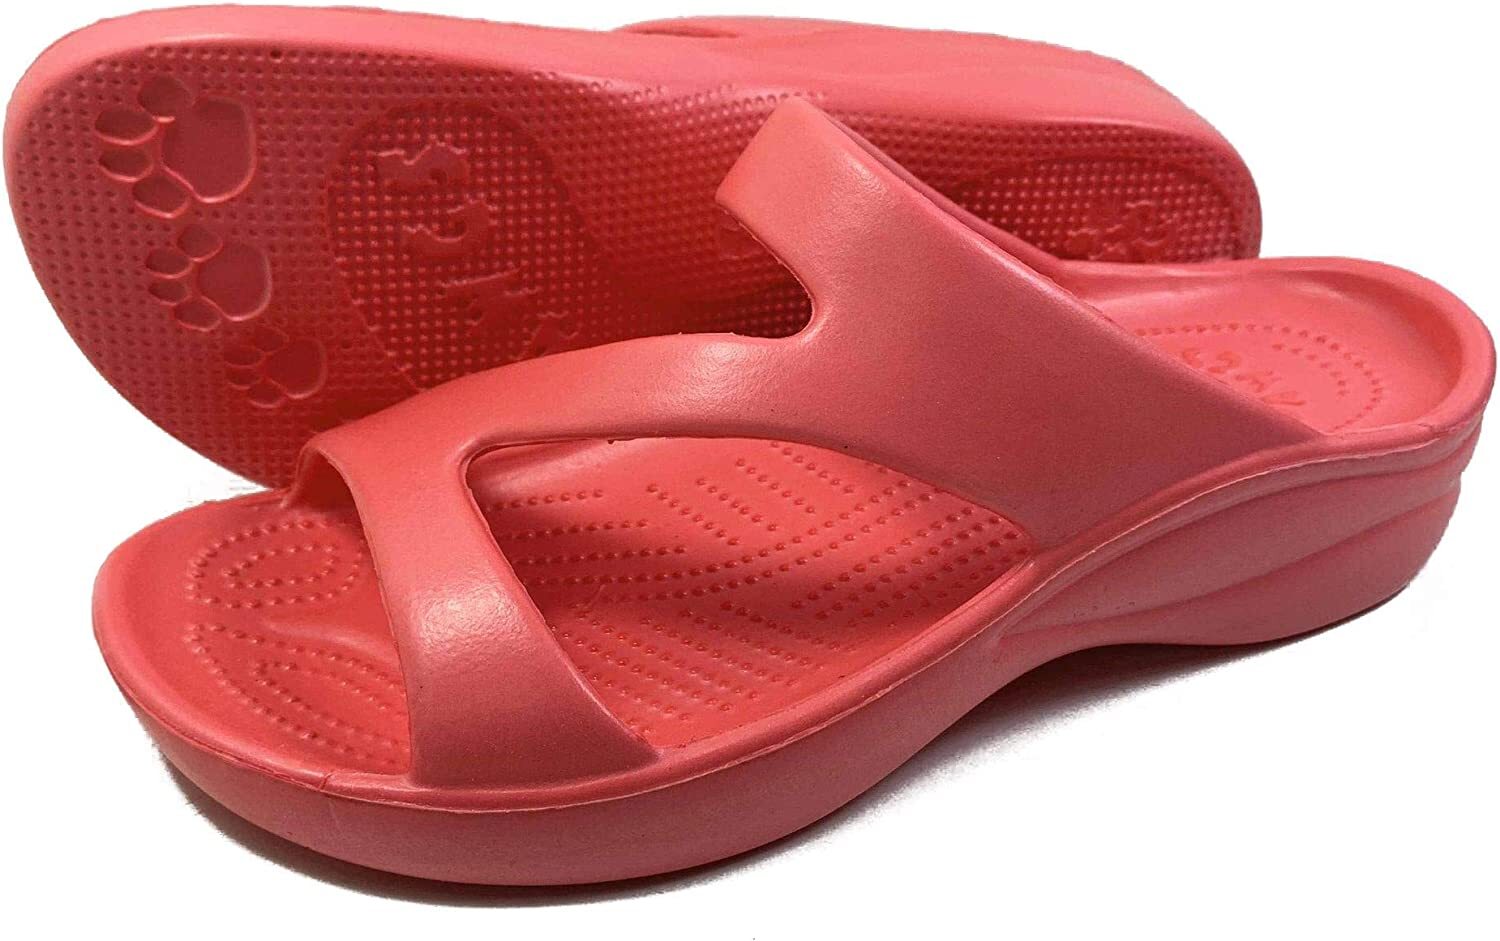 A pair of red sandals with a textured insole and patterned outsole, no persons present